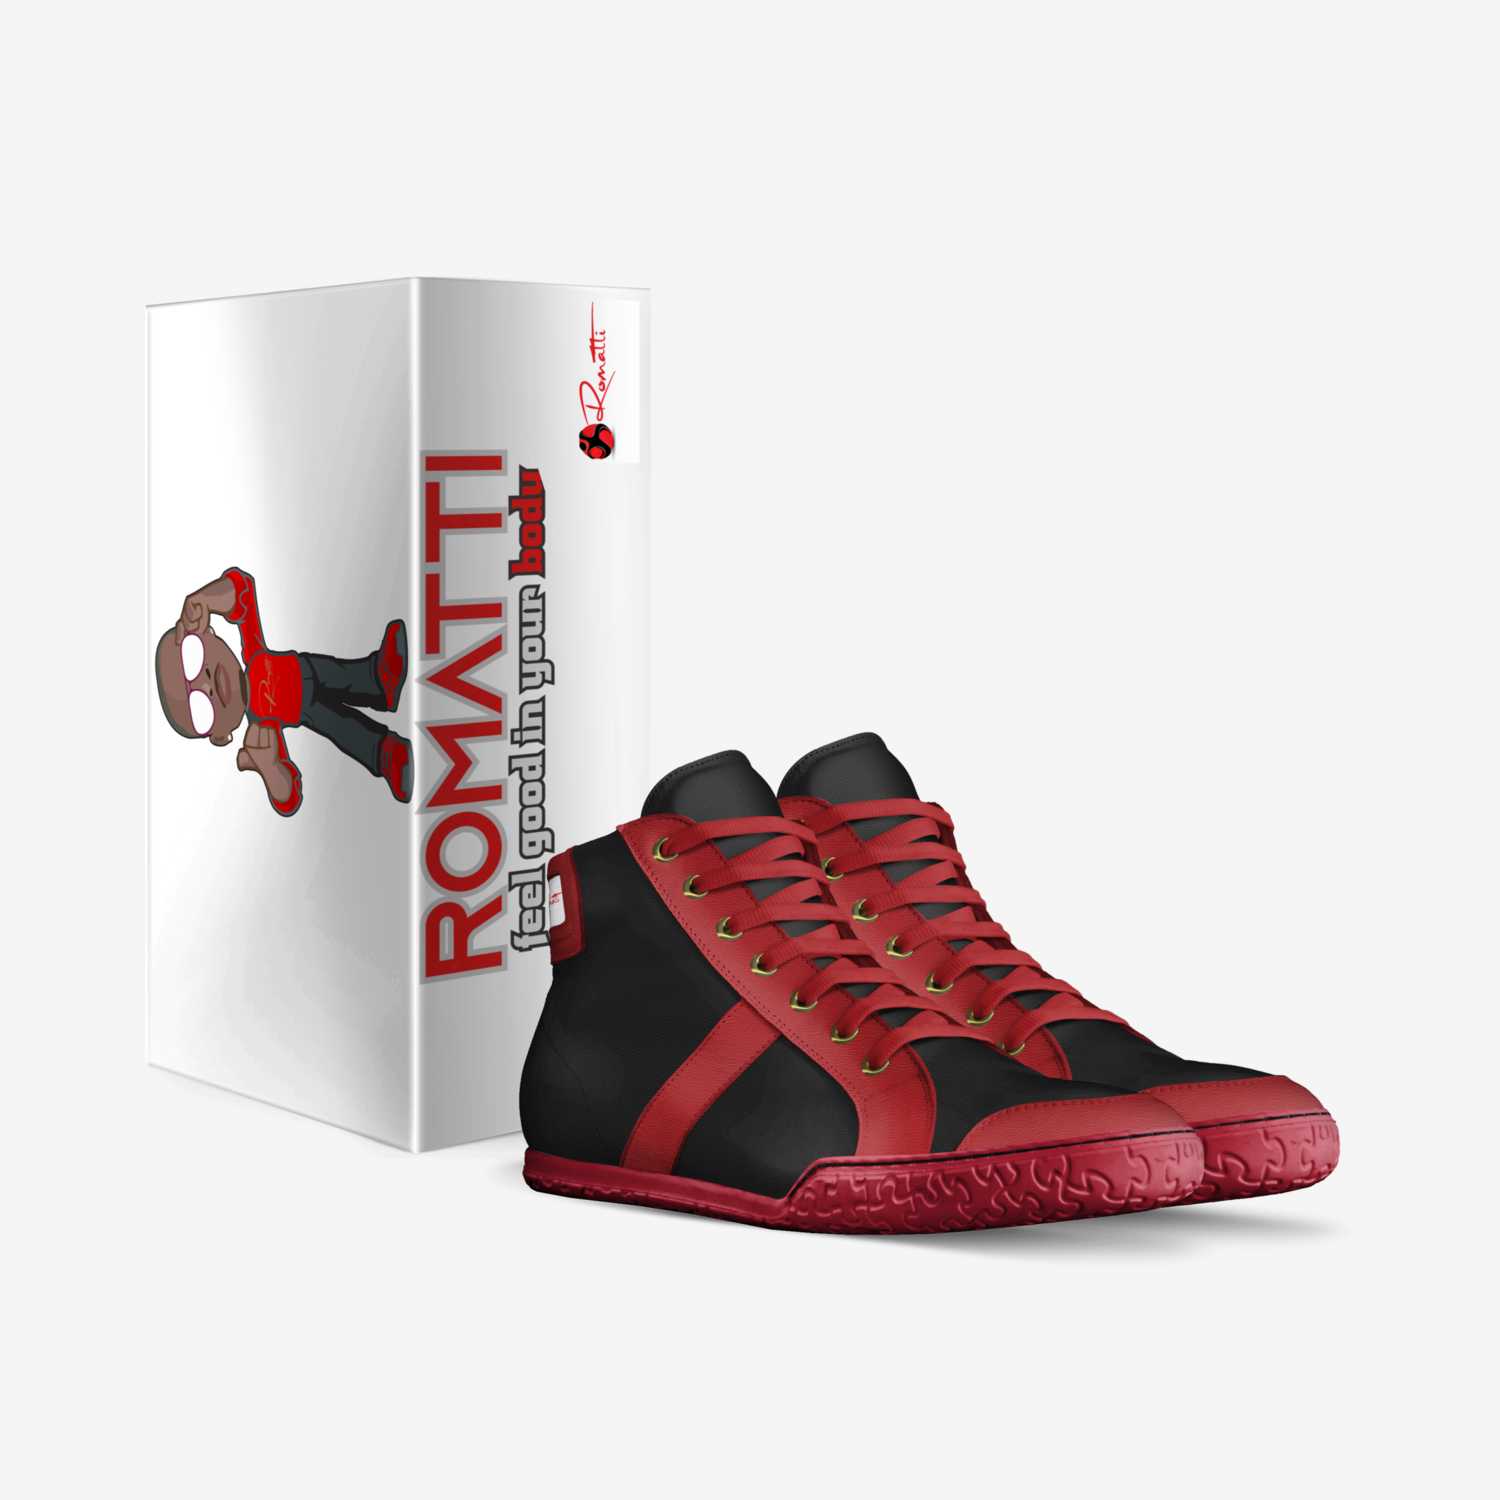 Romatti 1 custom made in Italy shoes by Roland Watkins Jr | Box view